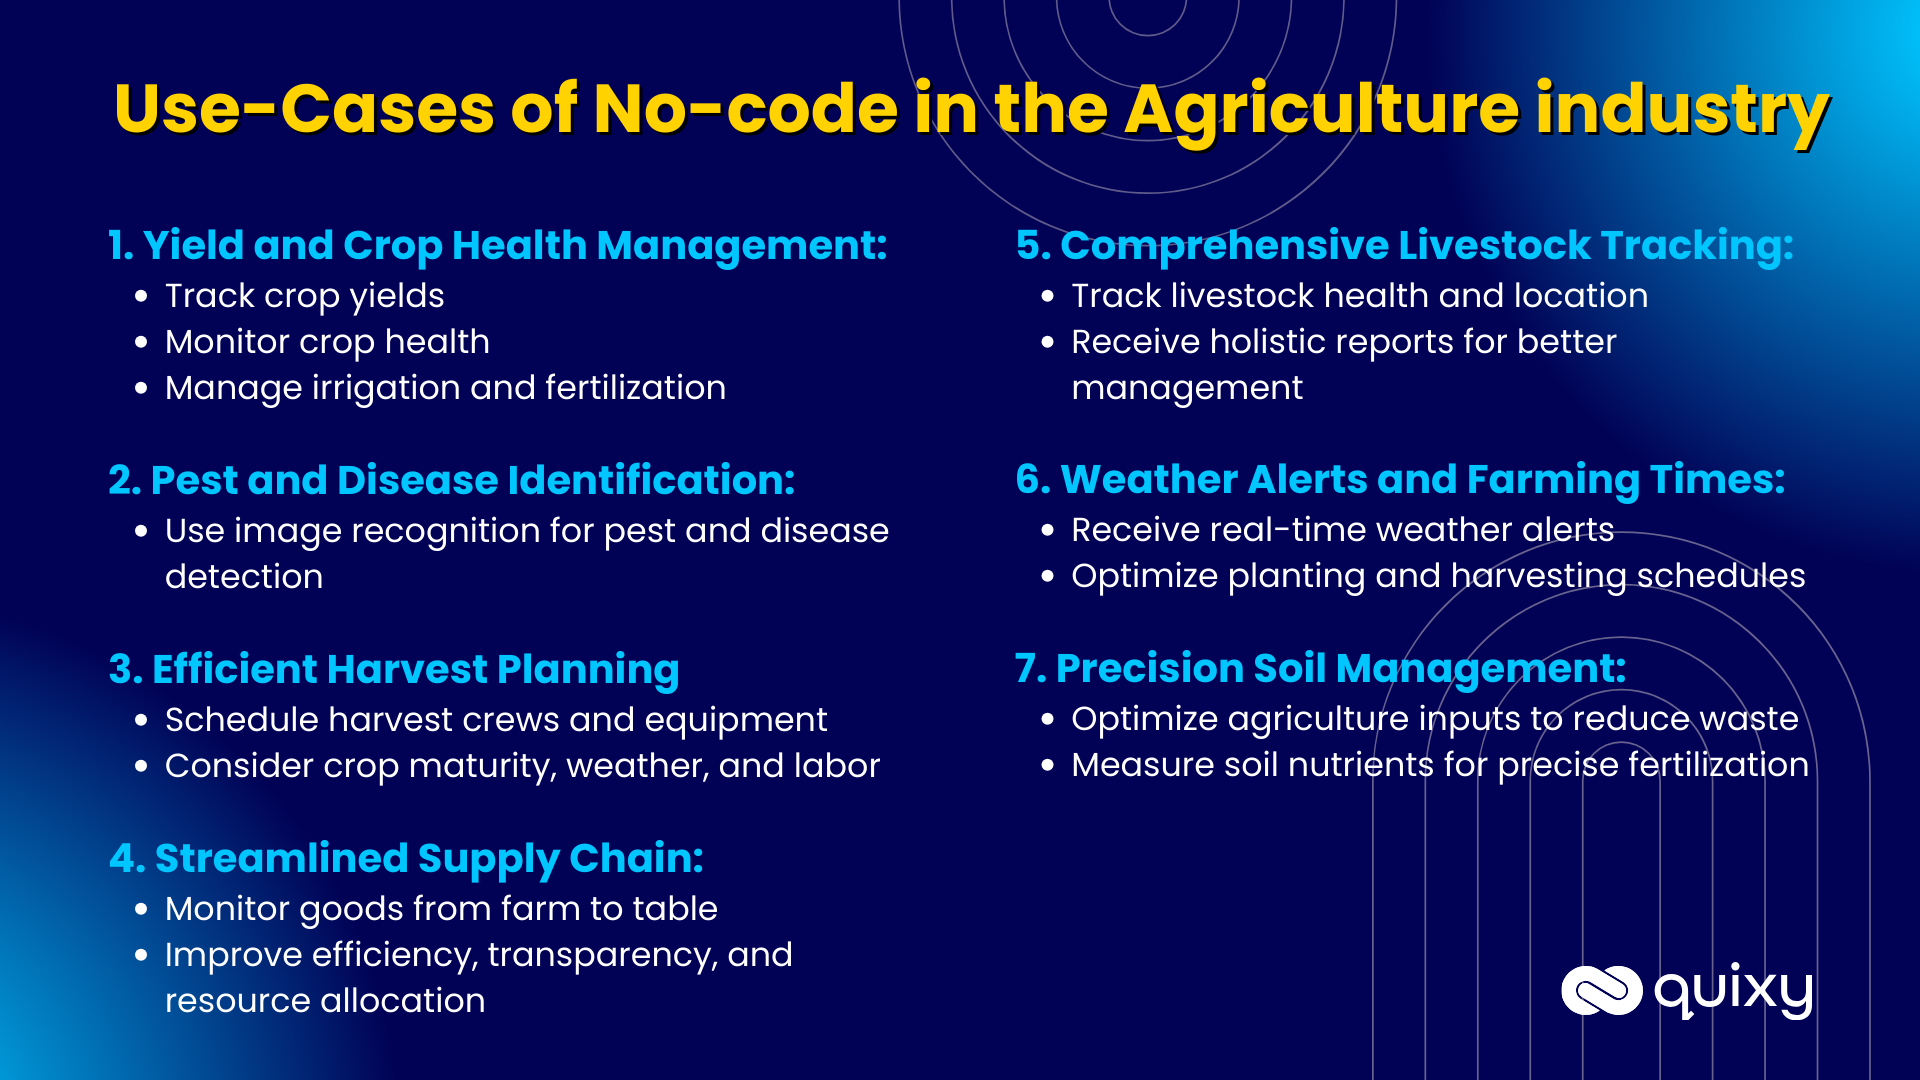 Use-Cases of No-code in the Agriculture industry